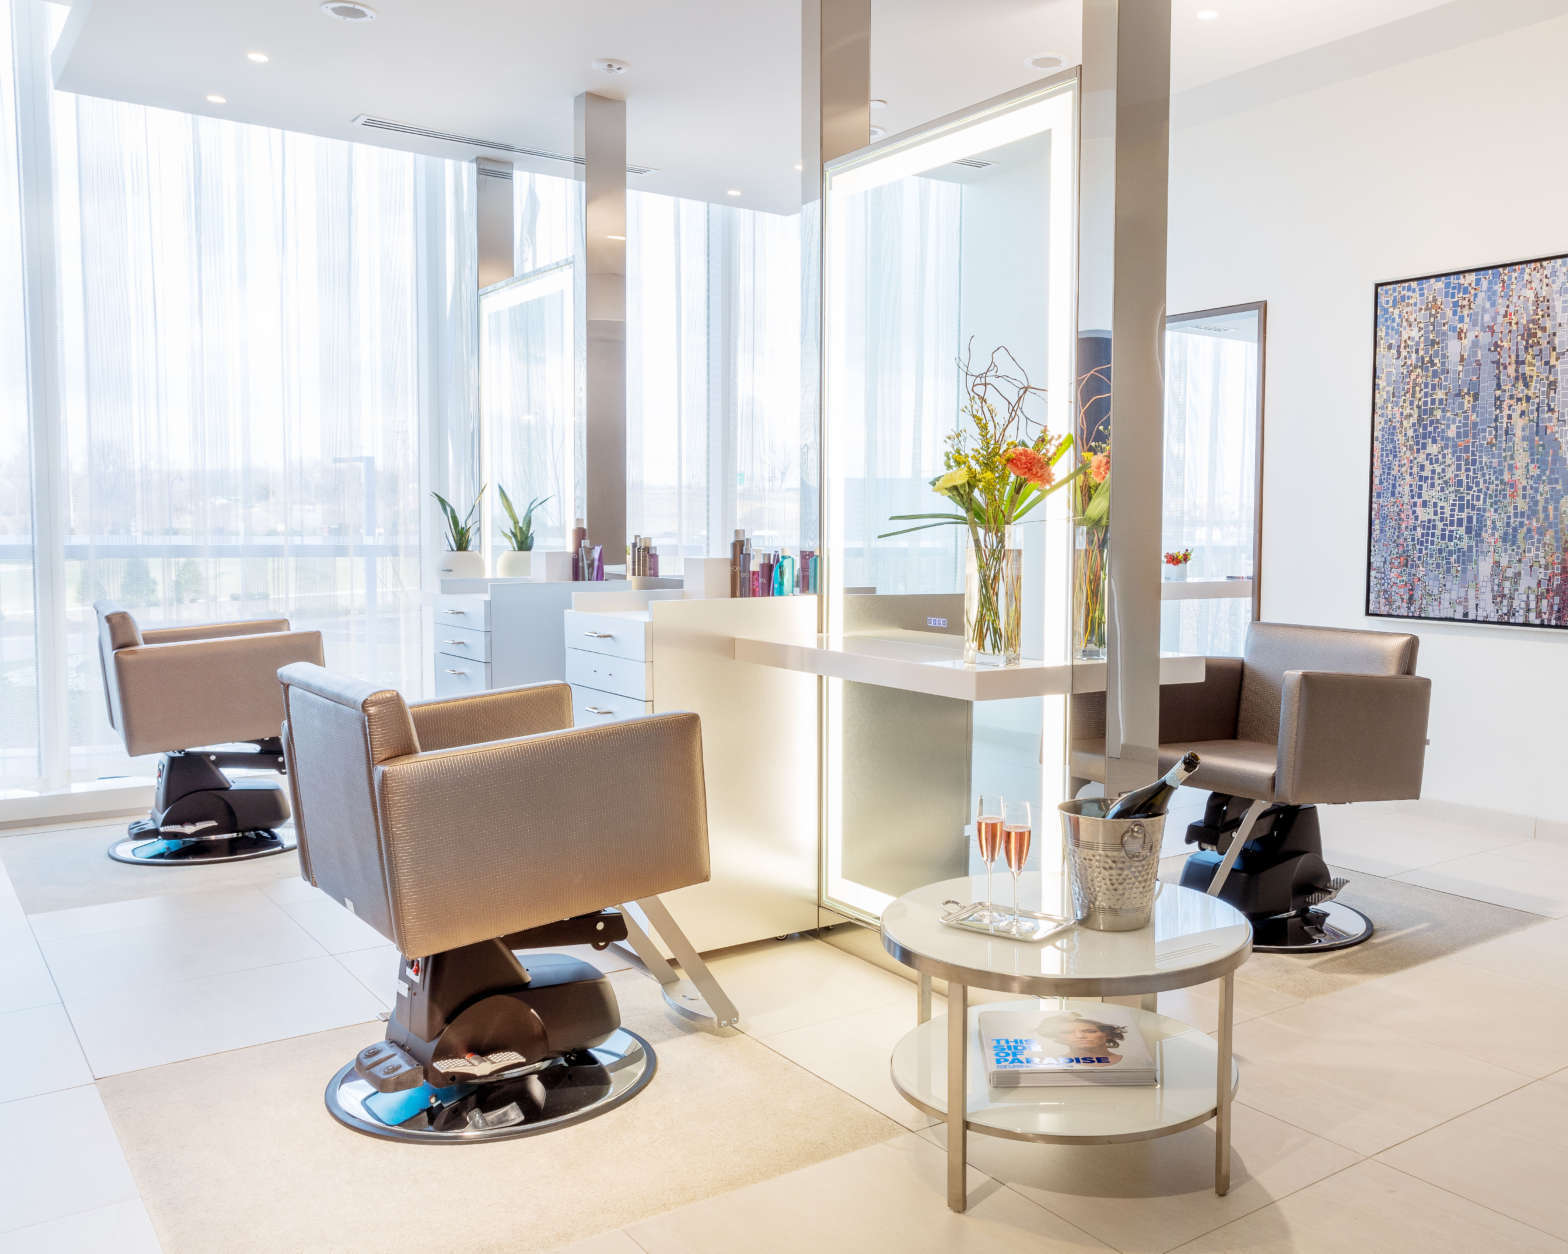 The hair salon is one of the features at as spa located at MGM National Harbor.
 (Courtesy MGM National Harbor)